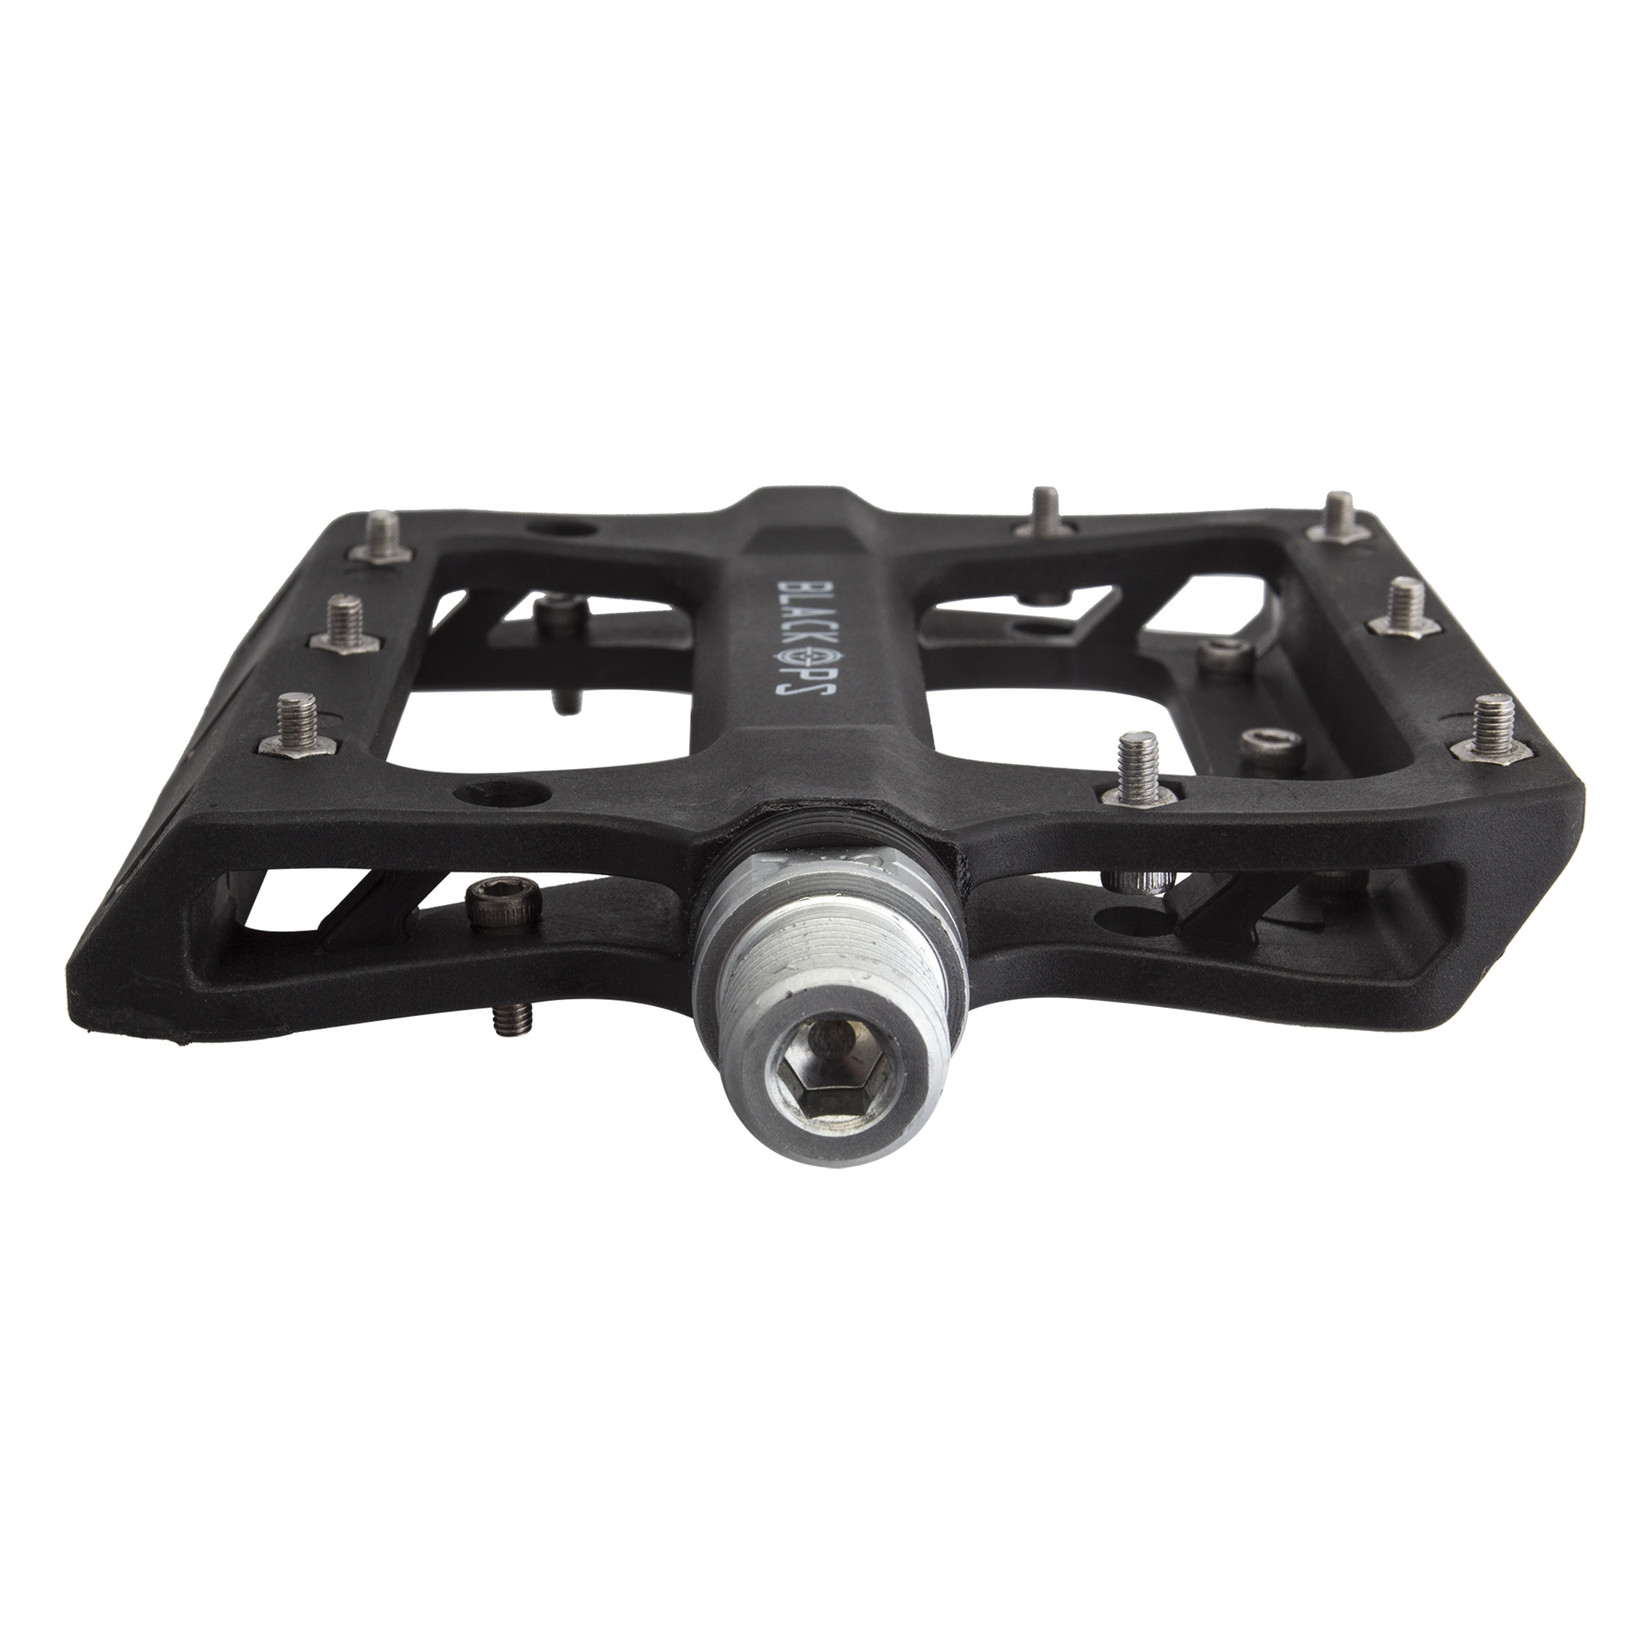 BLACK OPS Black Ops Nylo Pro II Pedals, 9/16